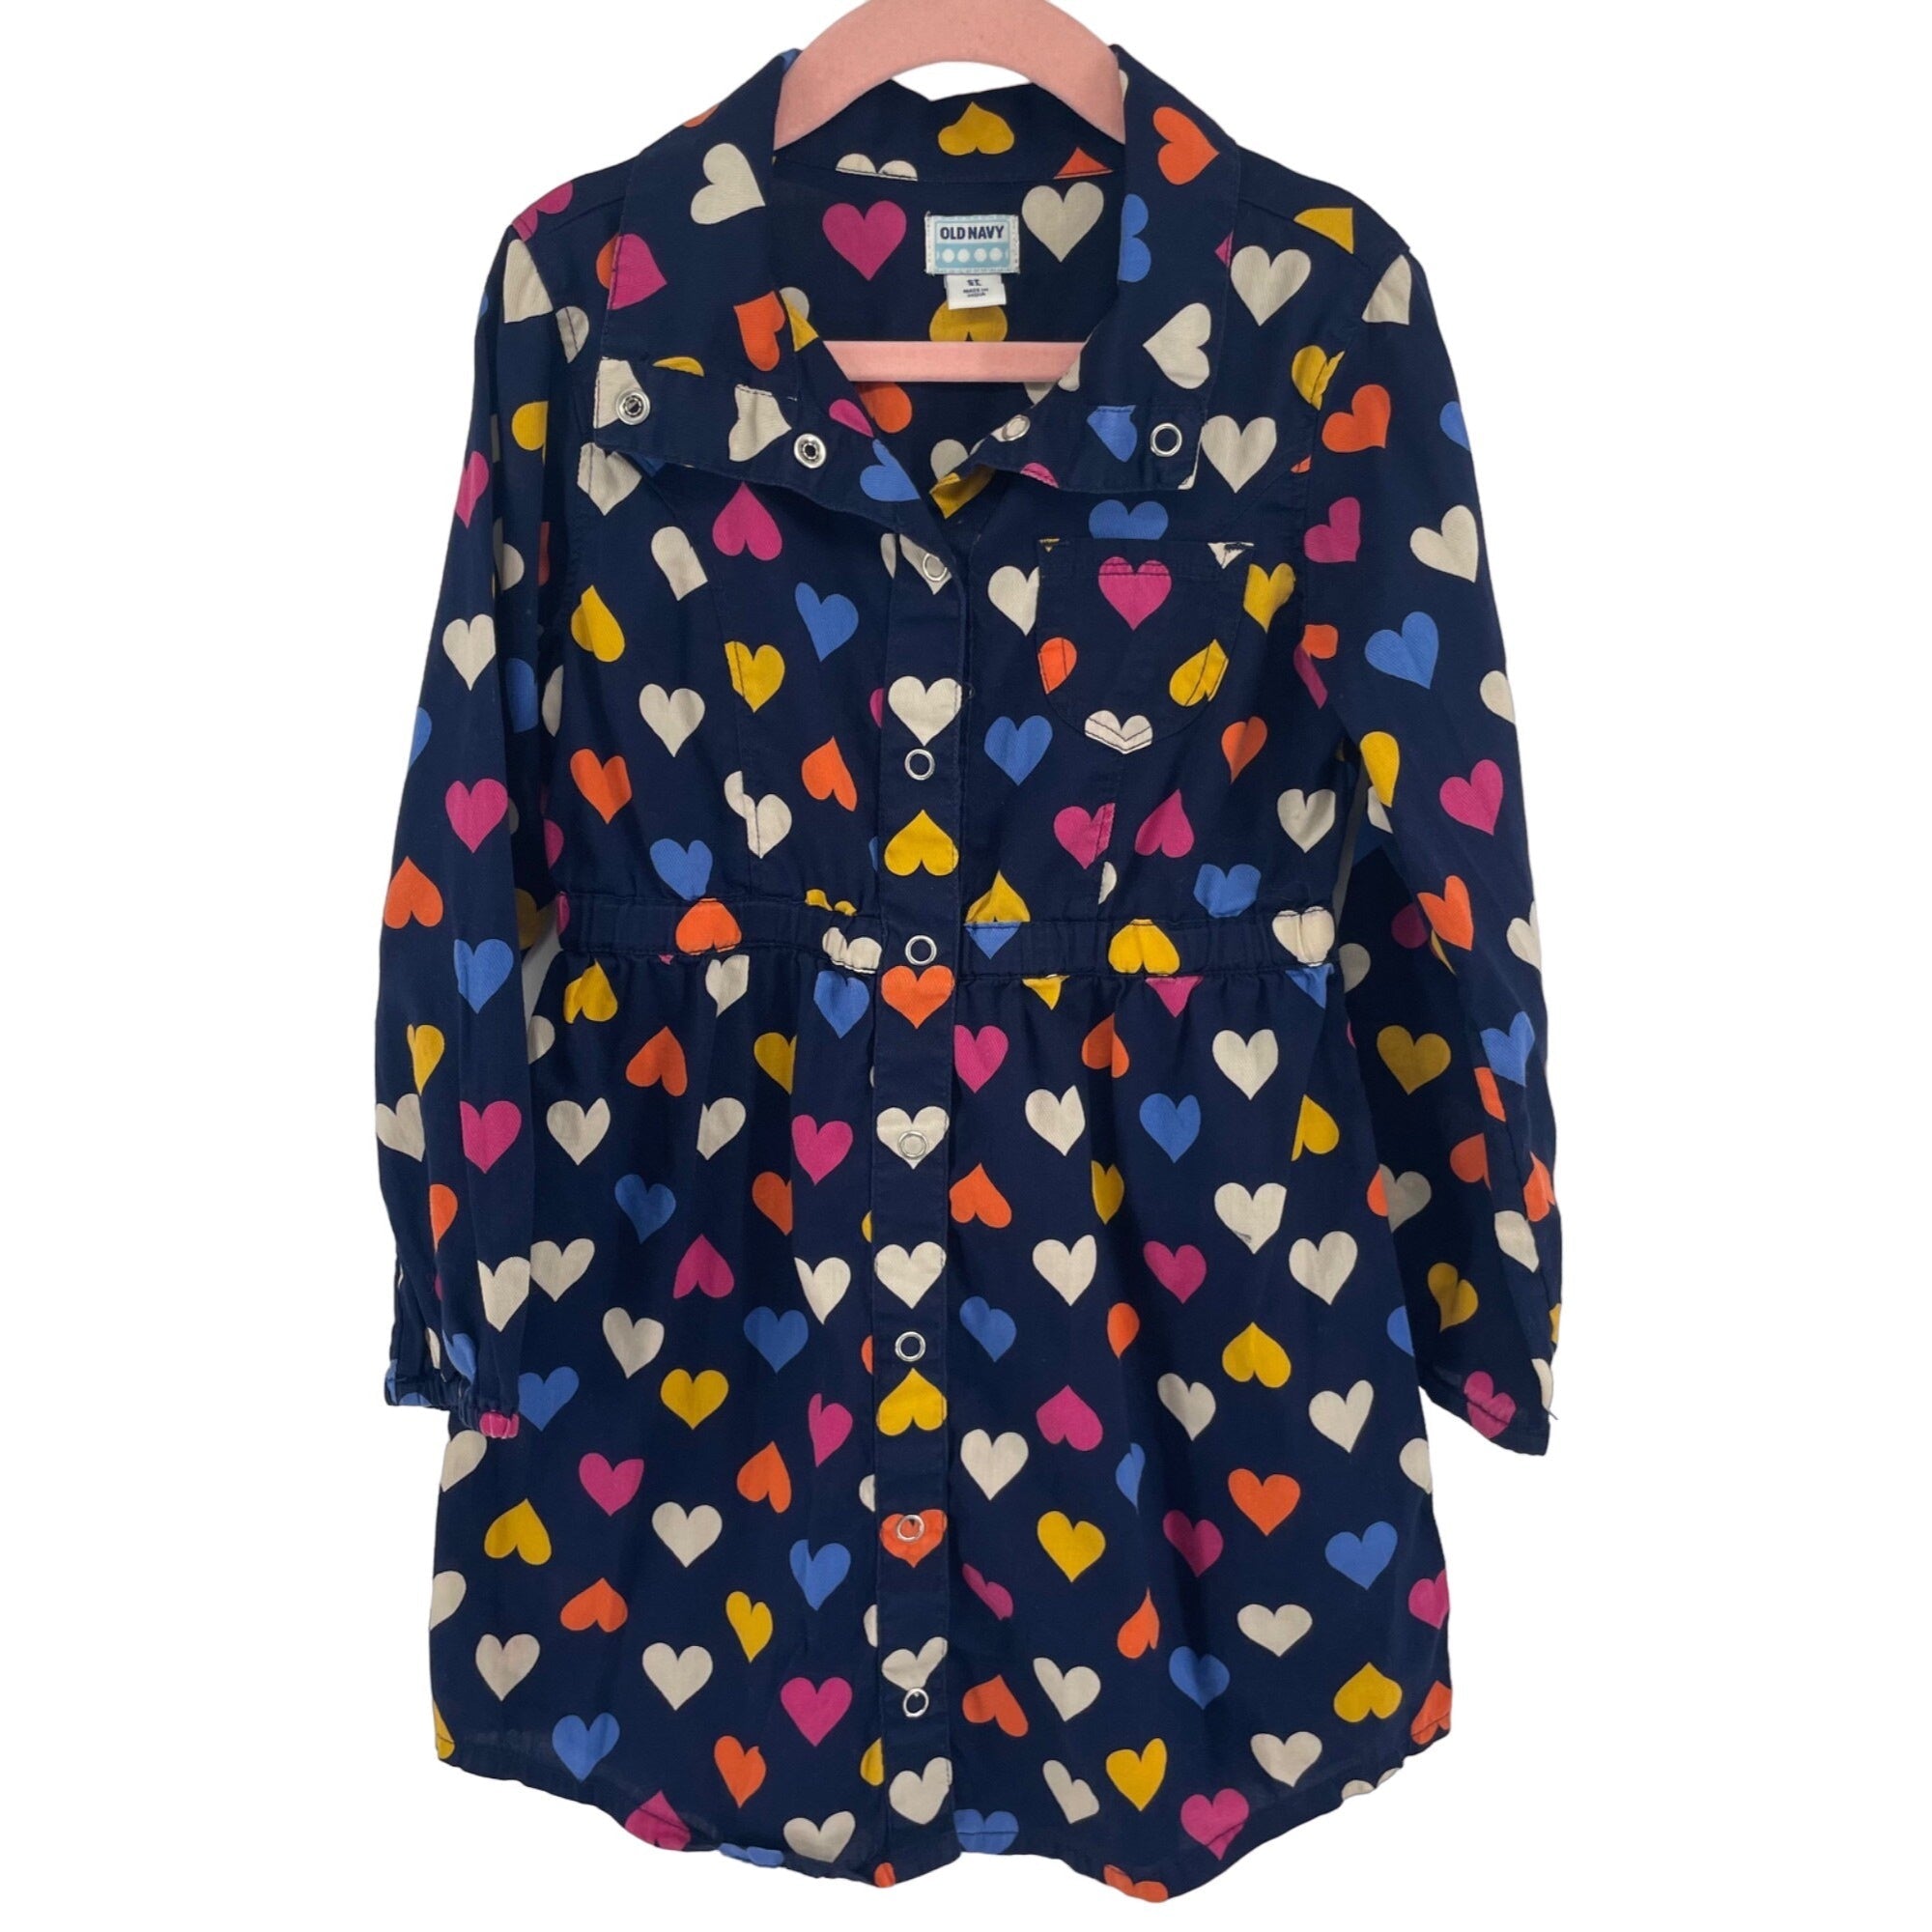 Old Navy Girl's Size 5T Navy Blue & Multi-Colored Heart Print Long-Sleeved Dress